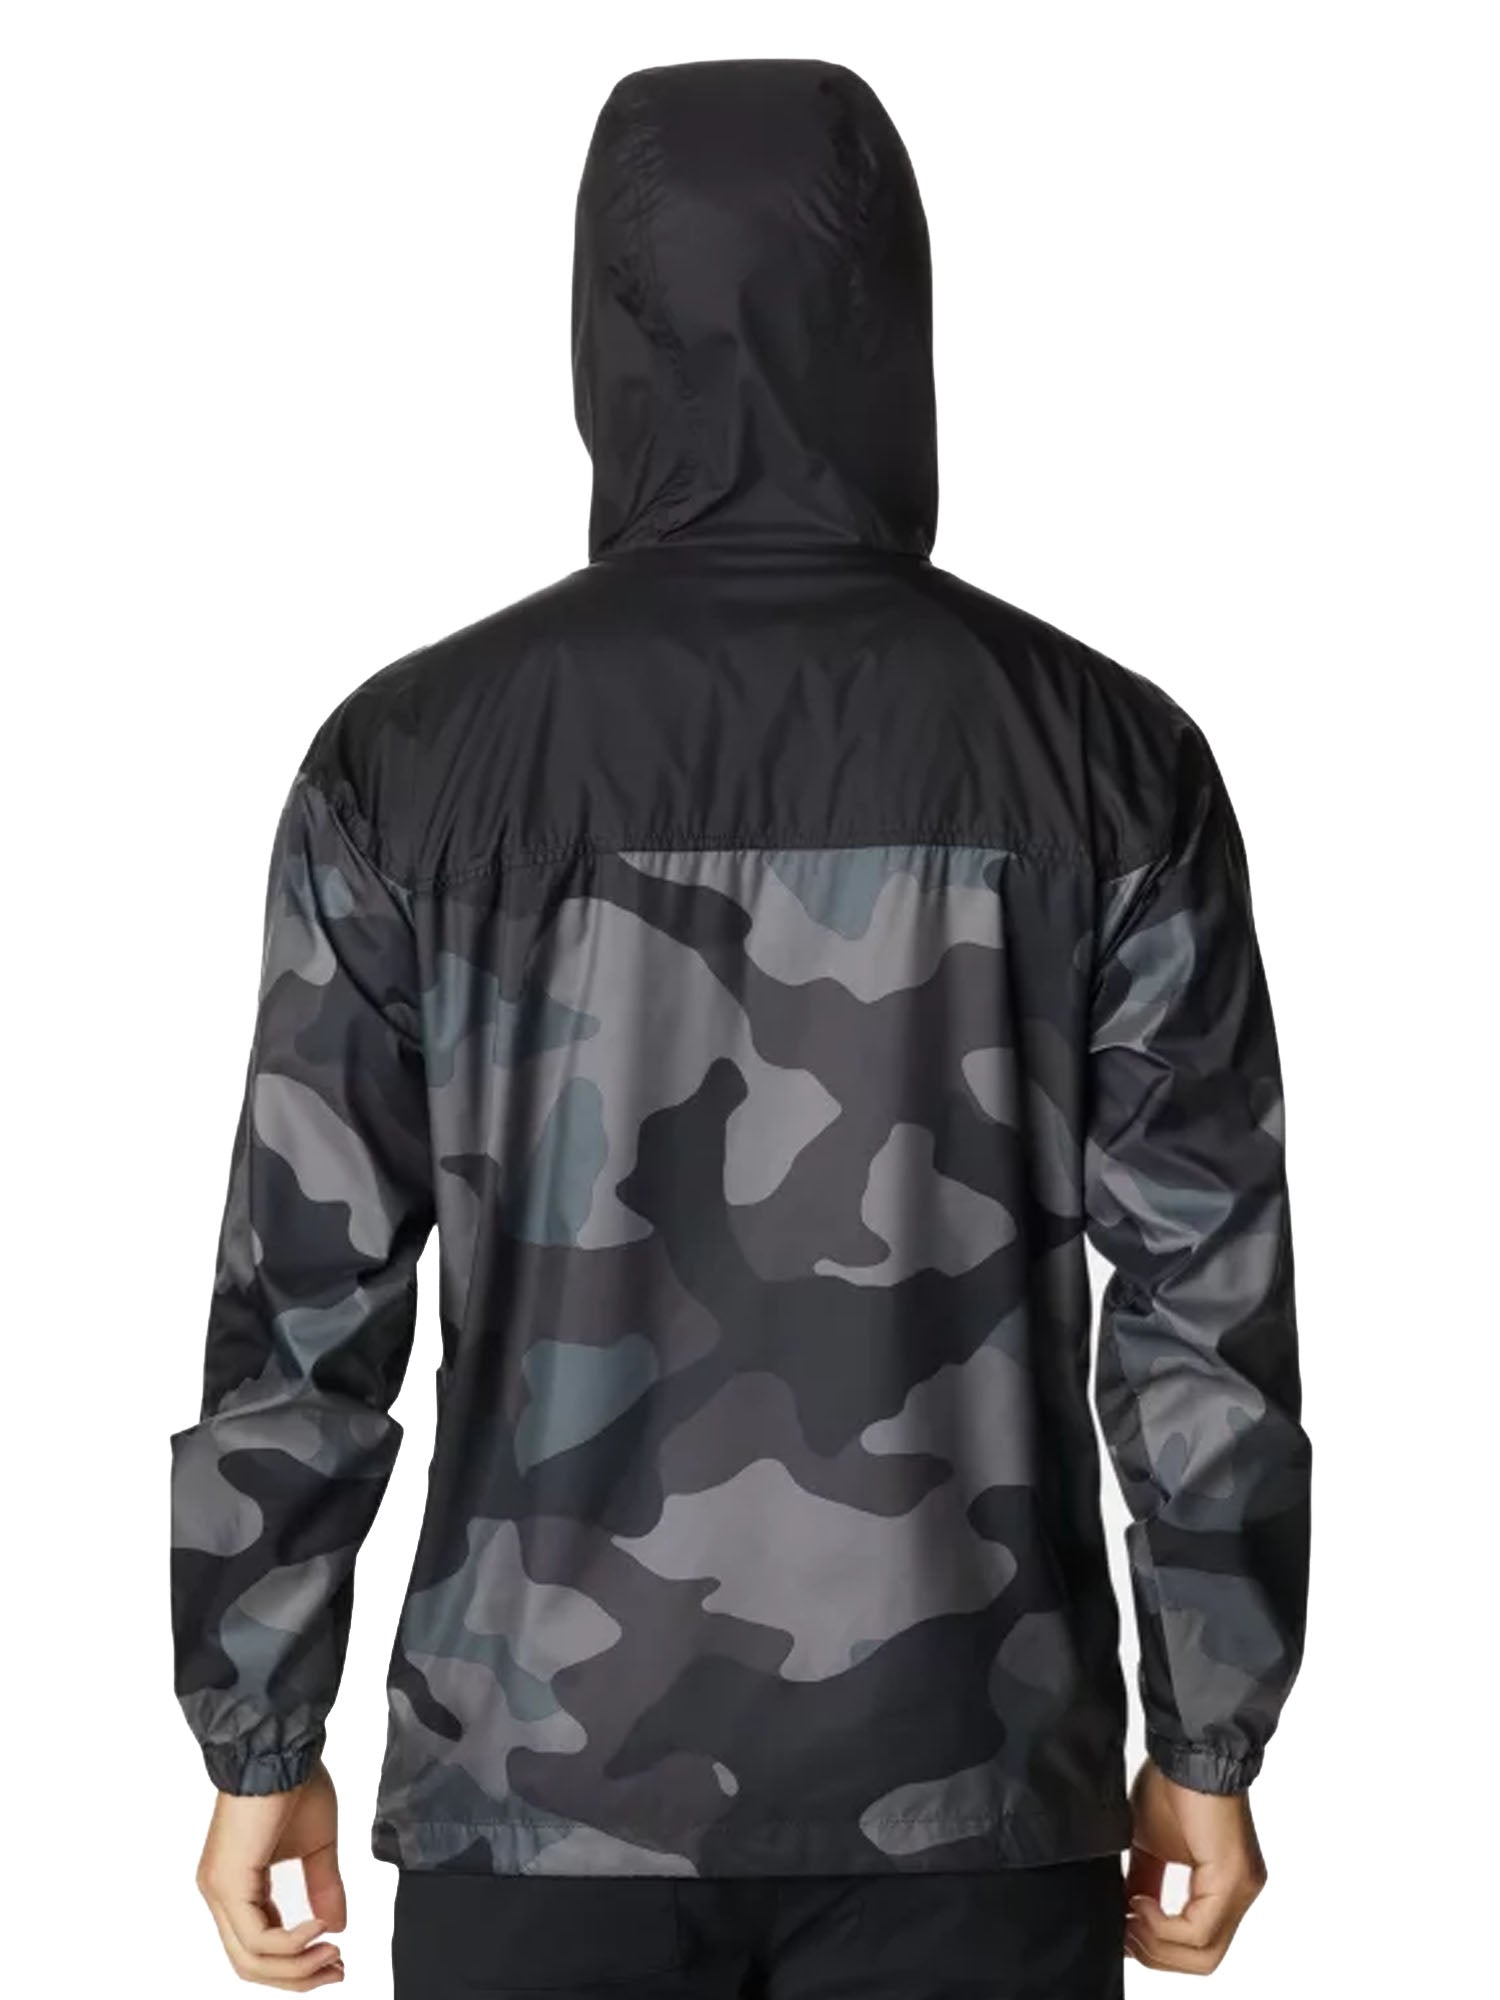 COLUMBIA GIACCA A VENTO FLASH CHALLENGER™ NERO - CAMOUFLAGE